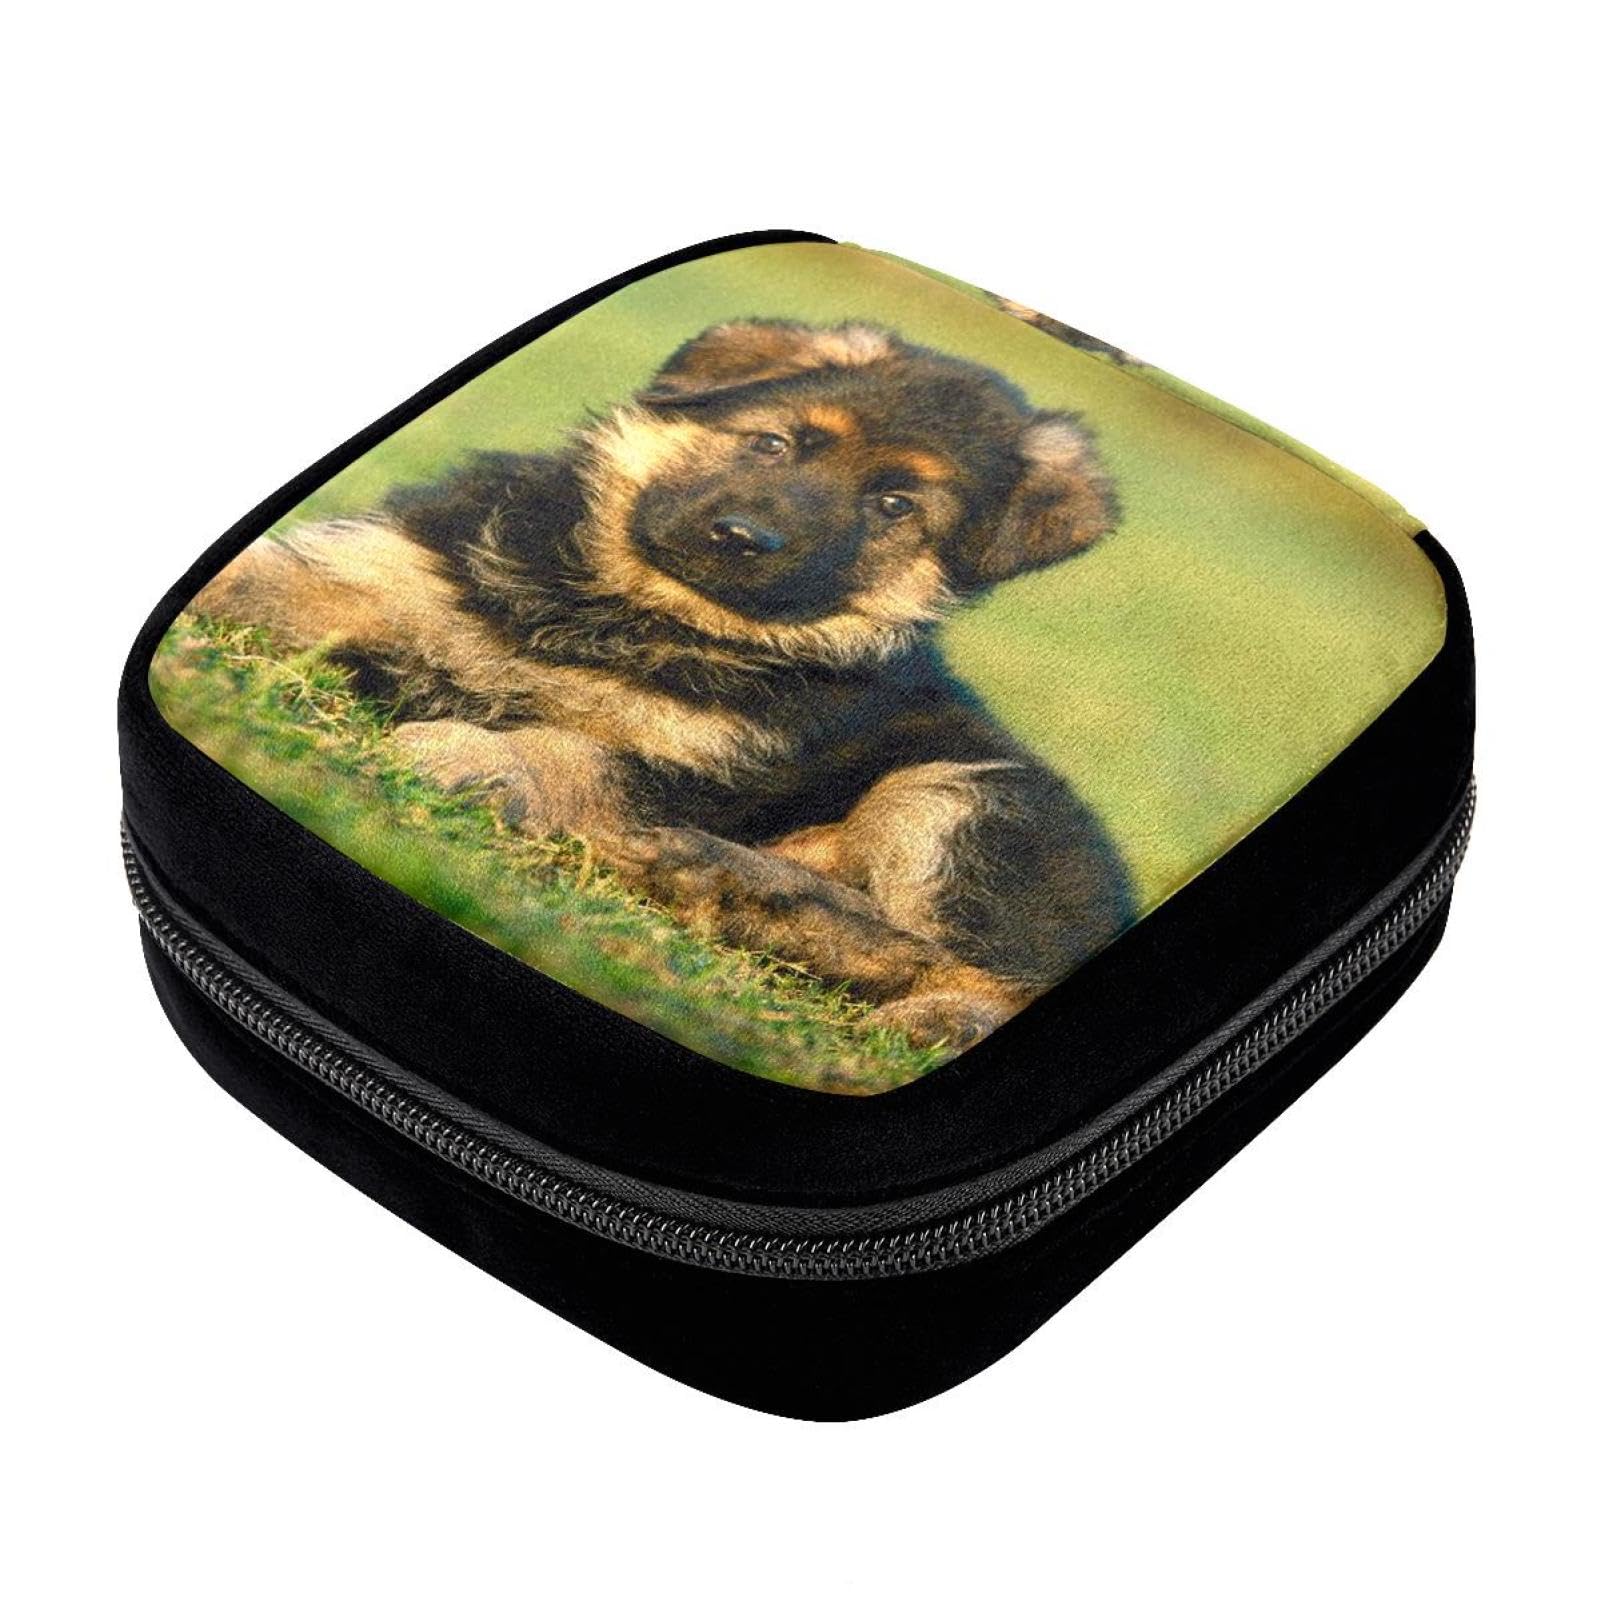 Amazon.com : German Shepherd Canvas Coin Purse with Zippered Portable  Change Pouch Wallet Travel Toiletry Bag Pencil Case : Sports & Outdoors